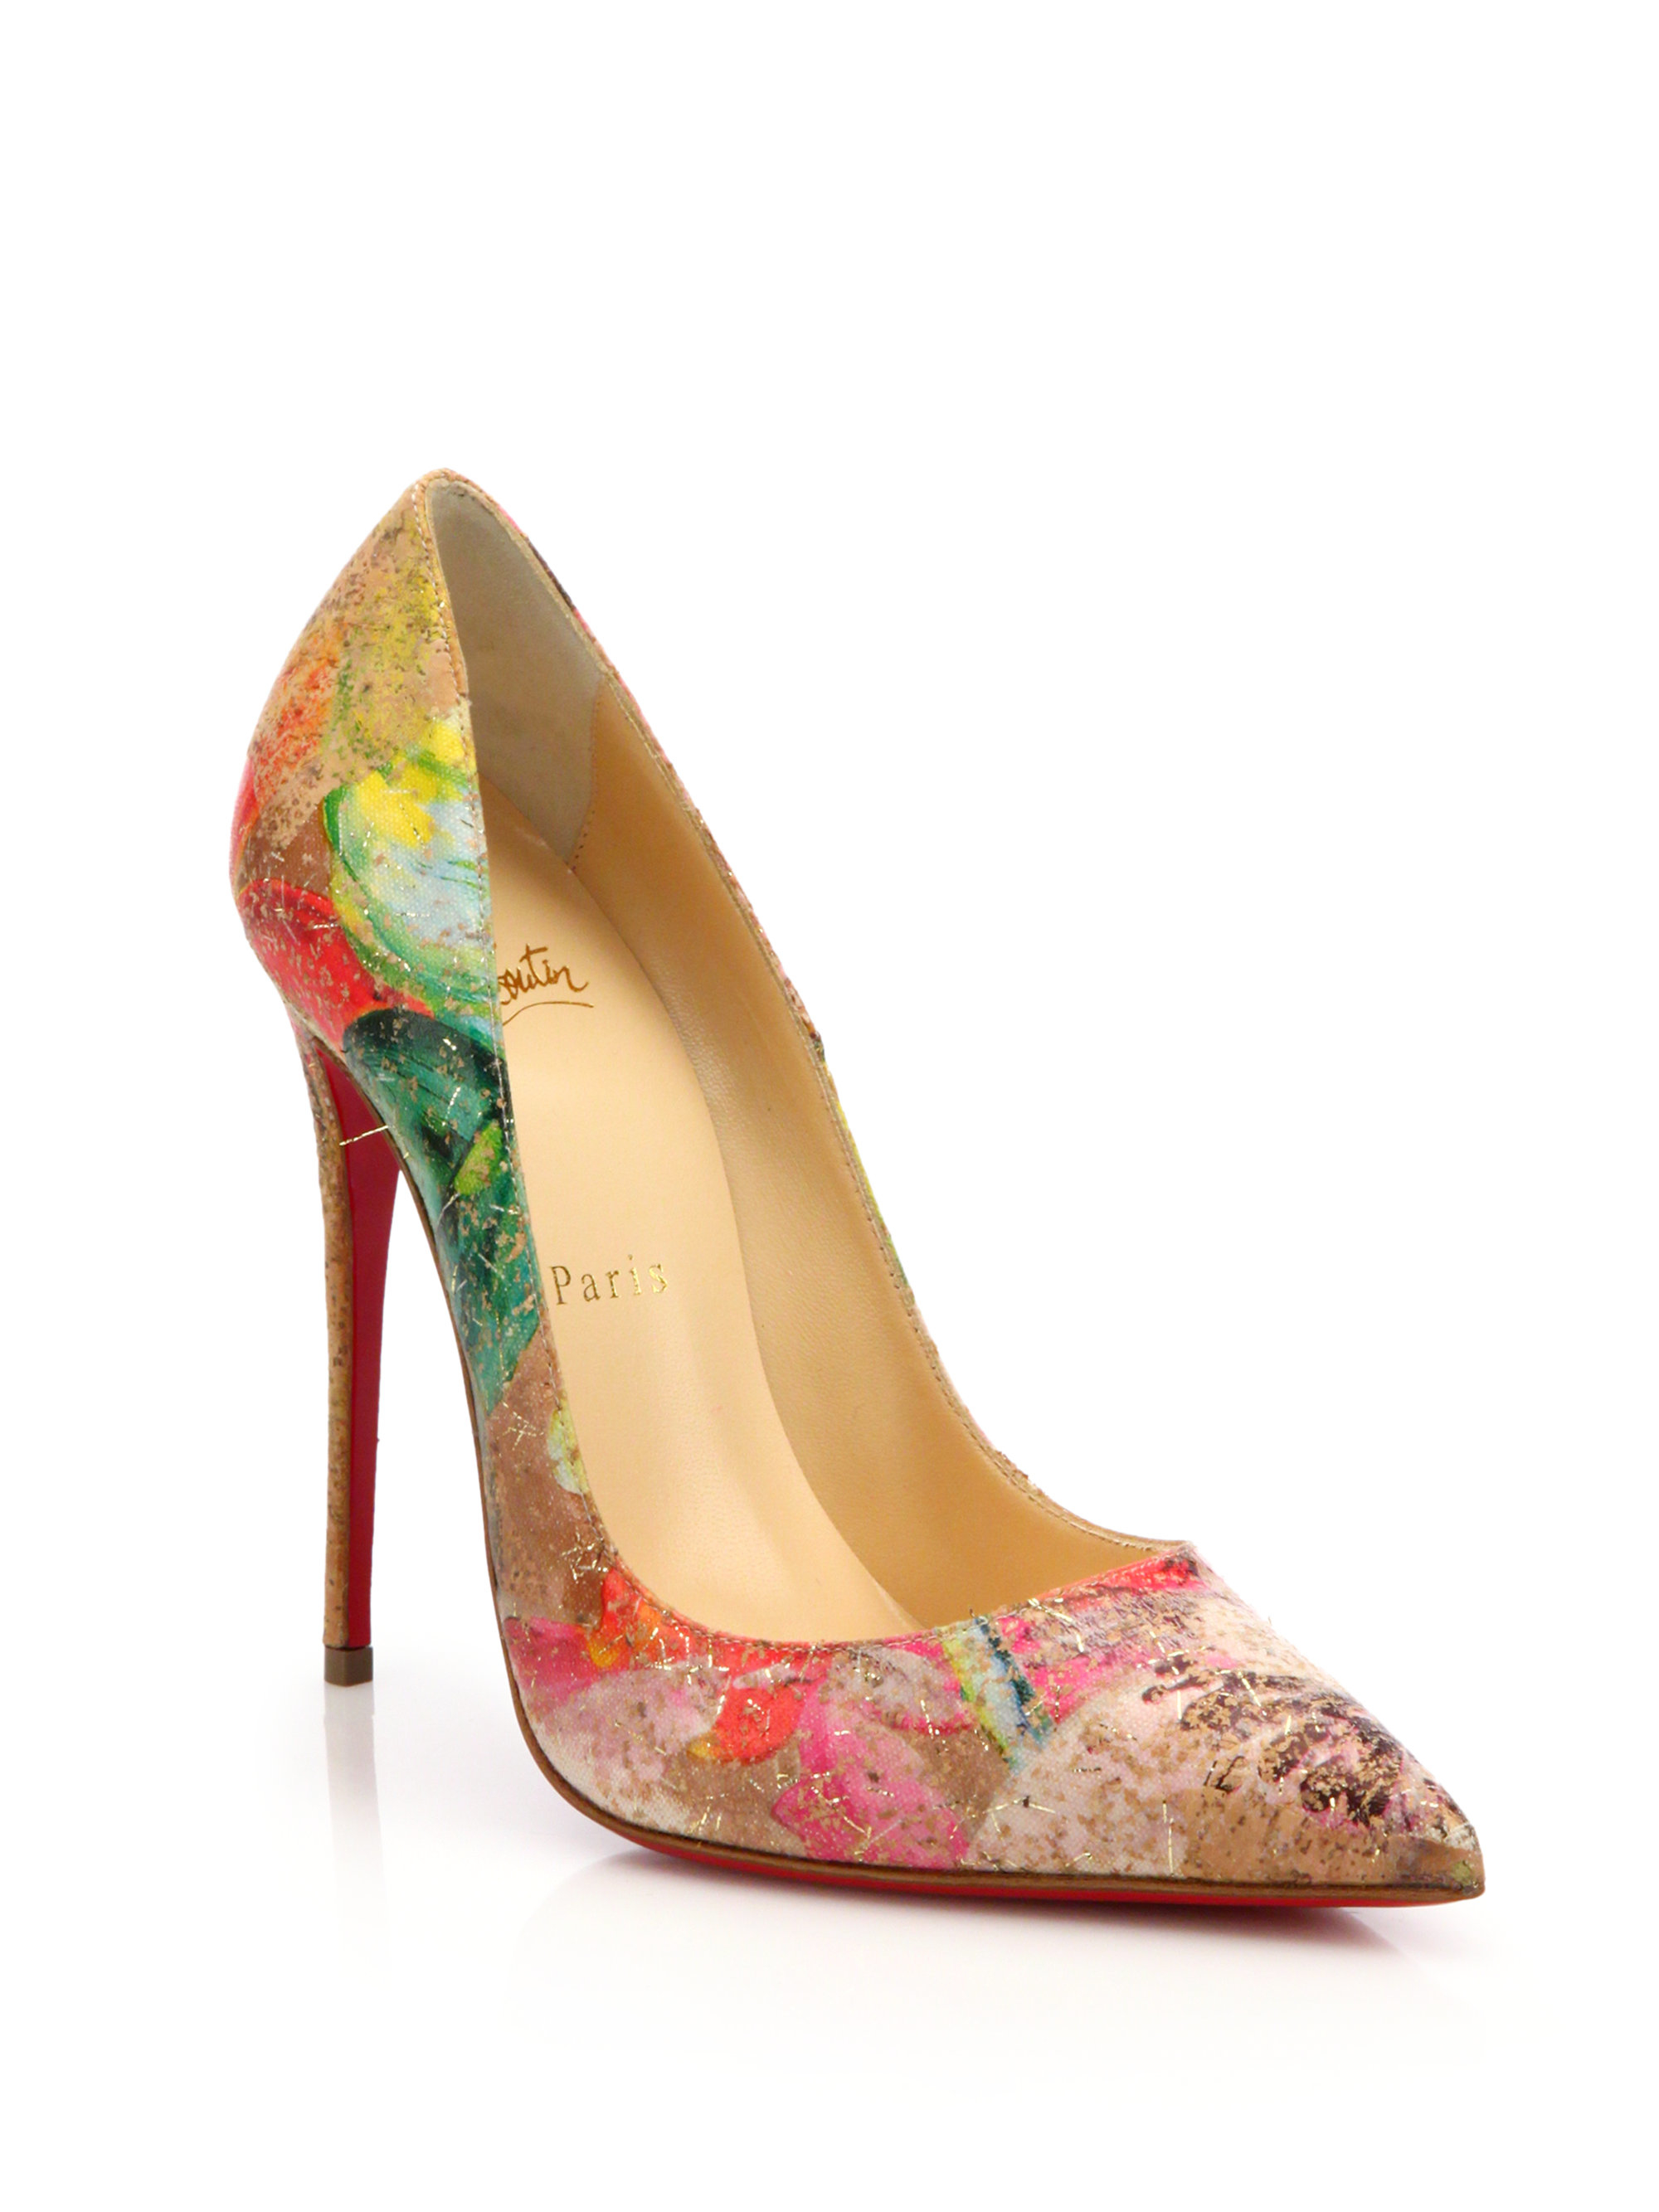 Christian louboutin So Kate Marble-Print Cork Pumps in Multicolor ...